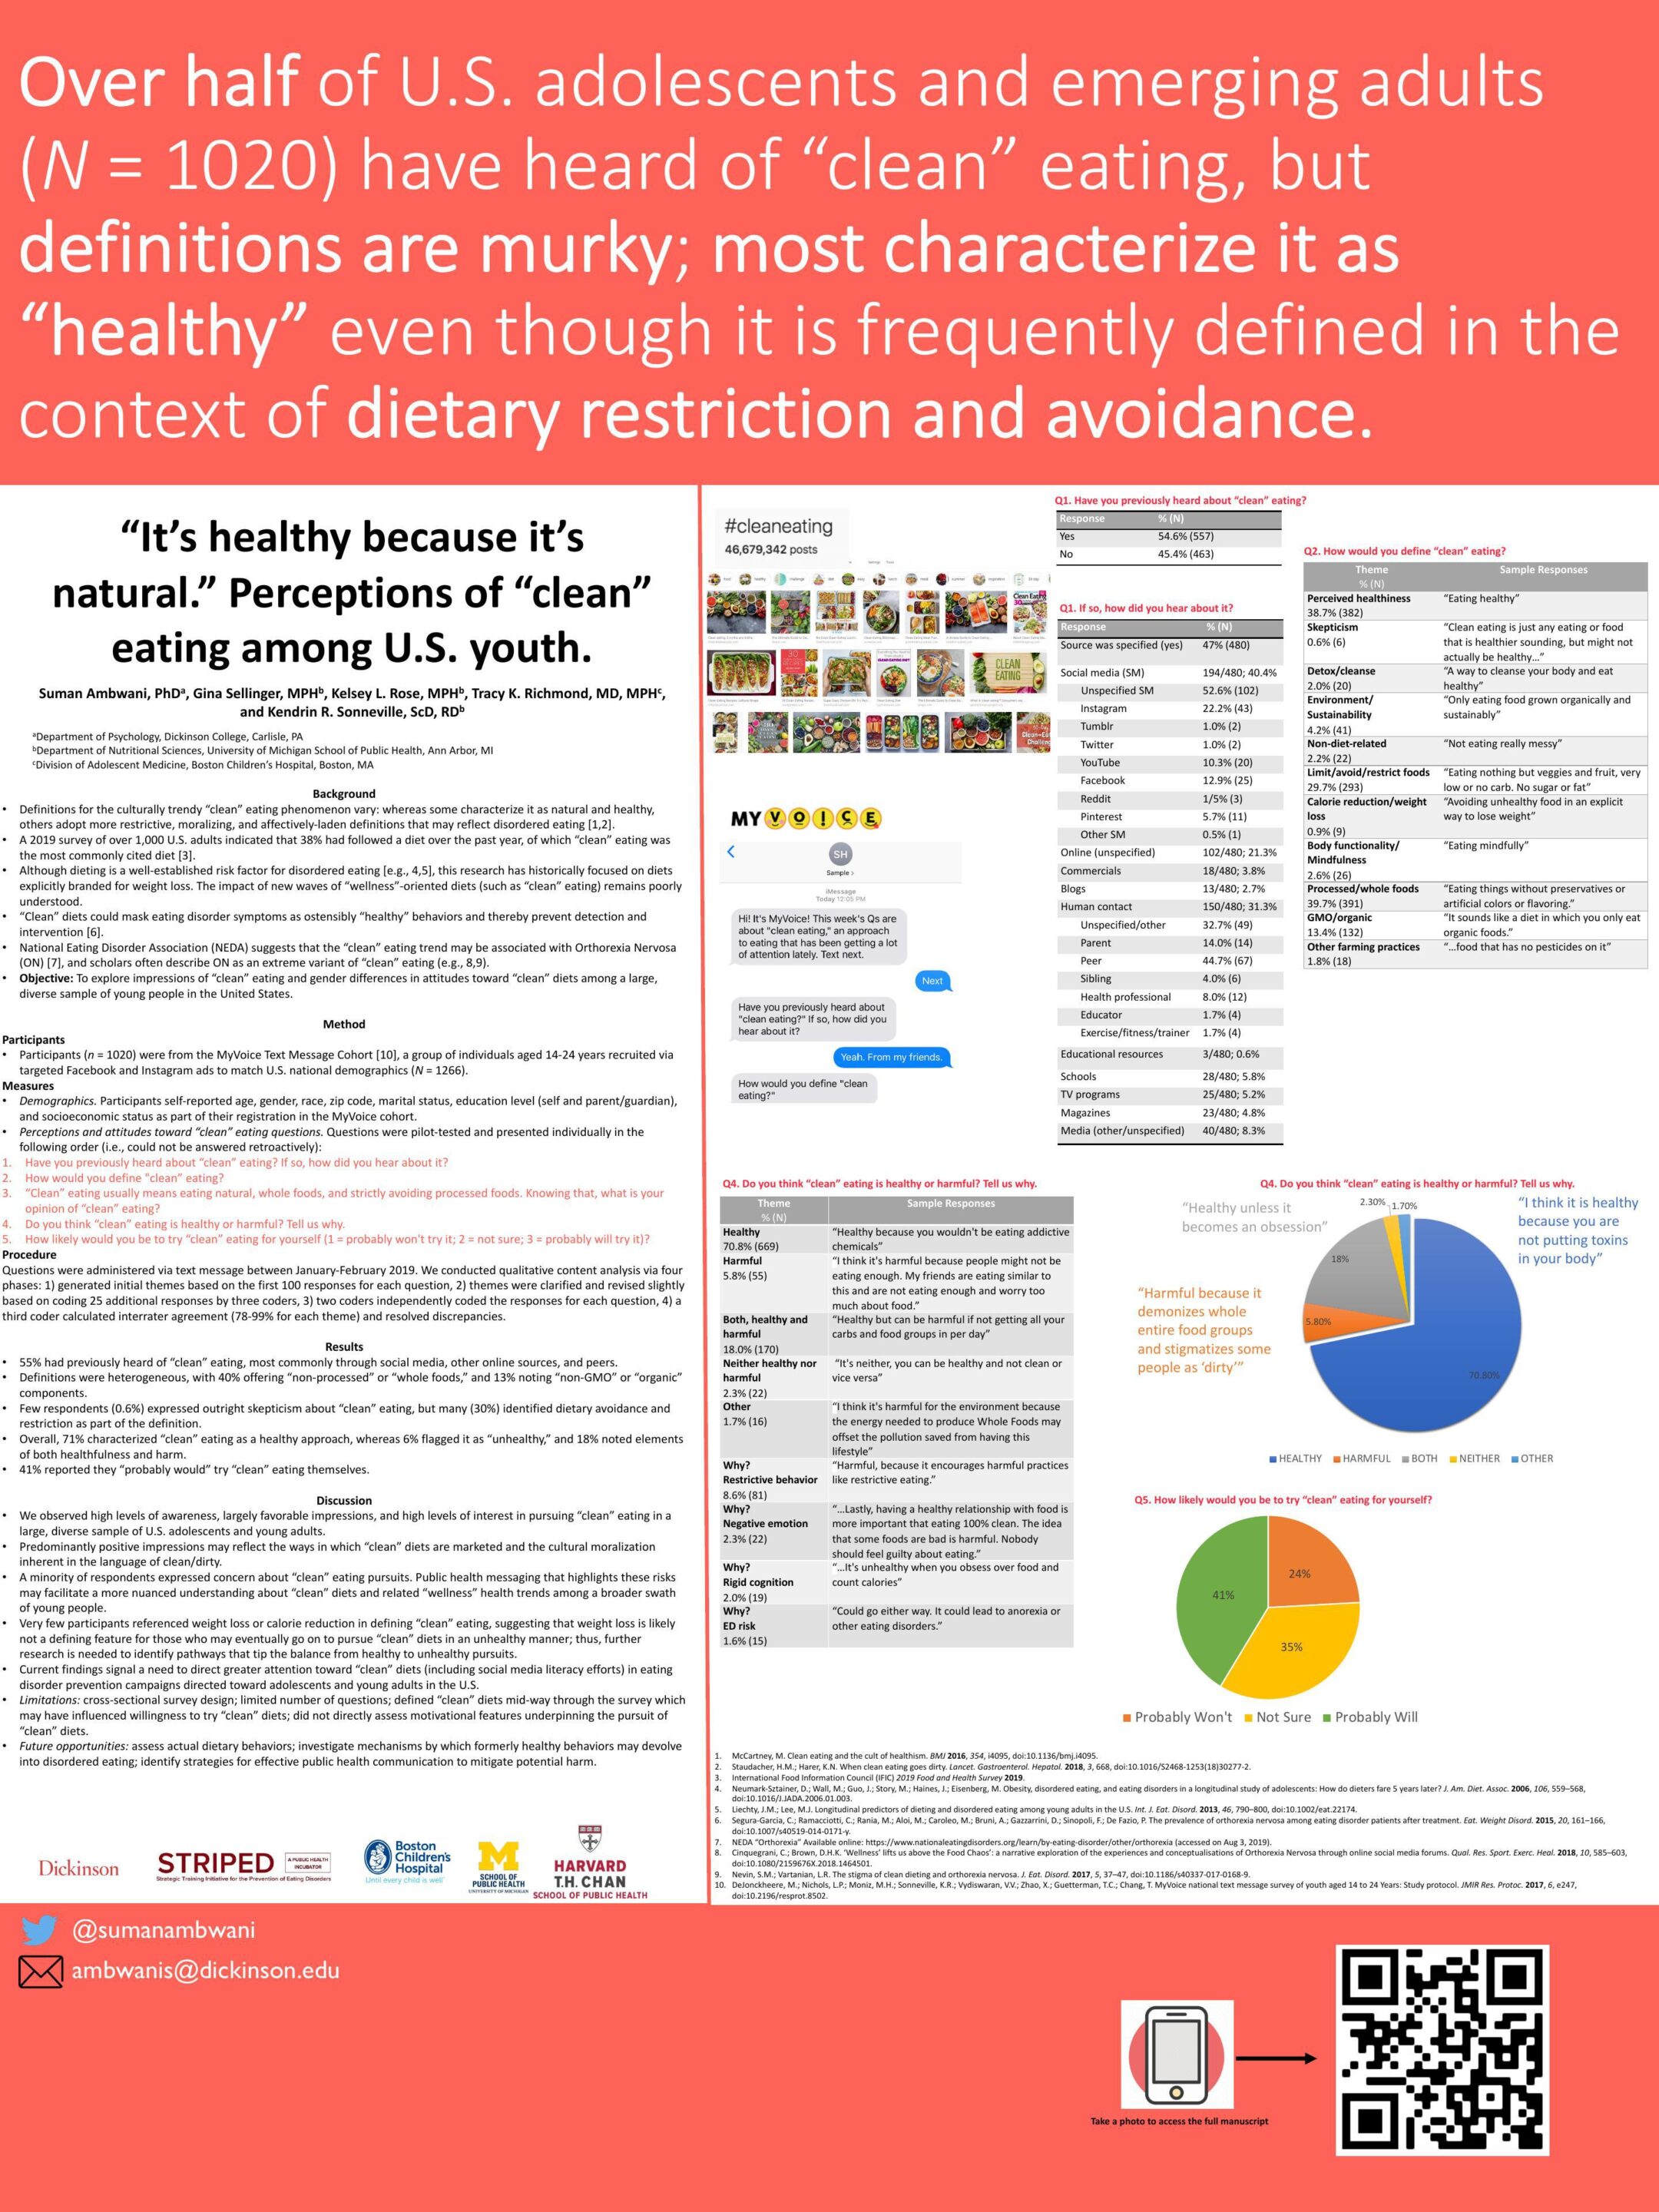 “It’s healthy because it’s natural.” Perceptions of “clean” eating among US adolescents and emerging adults